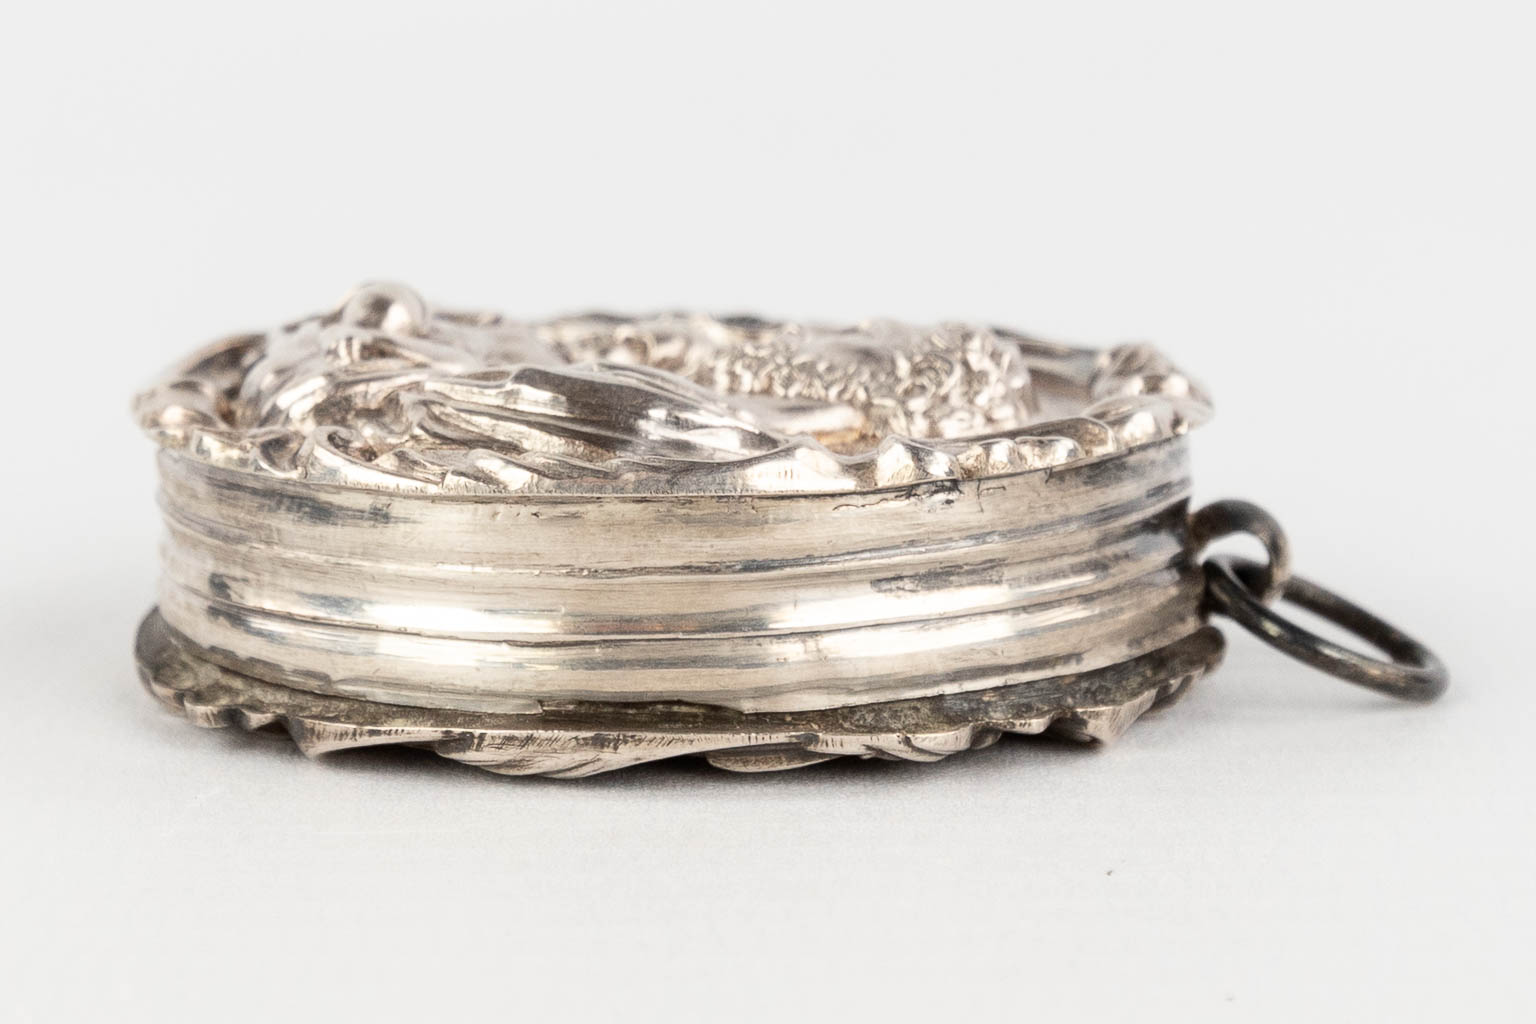 A set of 5 relics in a silver theca, with a repousse image of Joseph and Jesus. 19th century. (W: 4 x H: 4,5 cm)